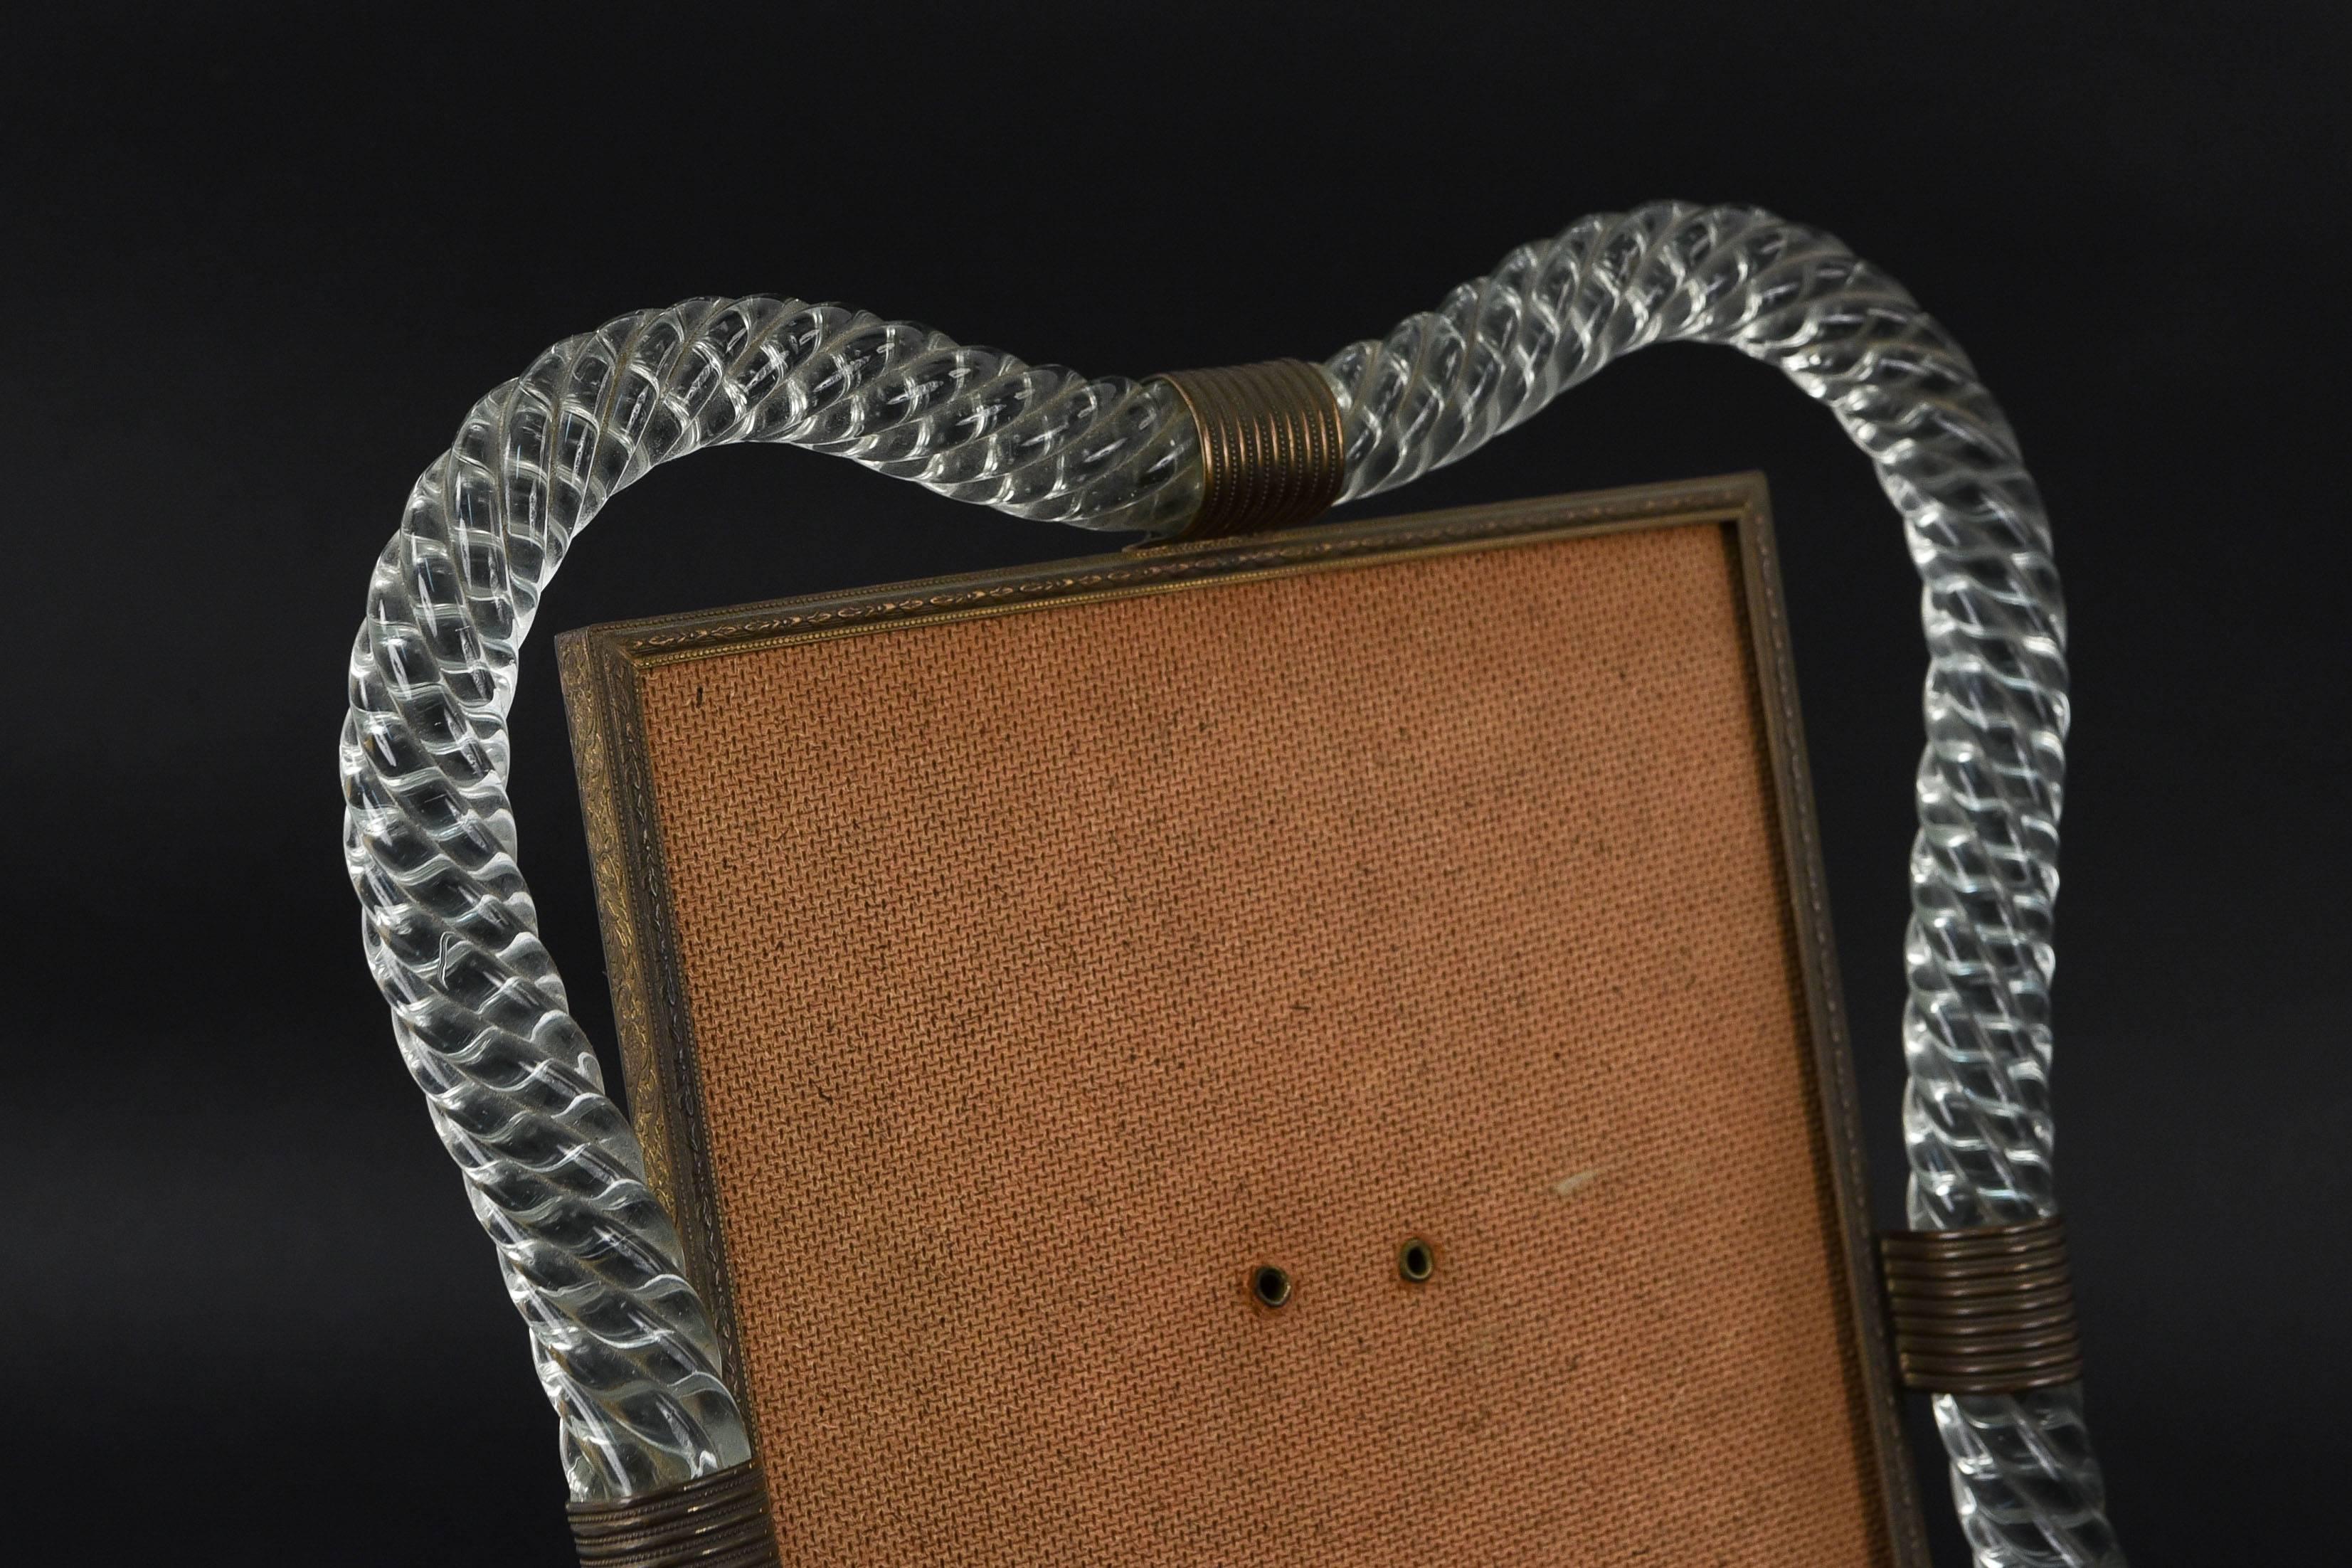 A beautiful picture frame with a twisted glass rope surround made in the mid-20th century in Italy.